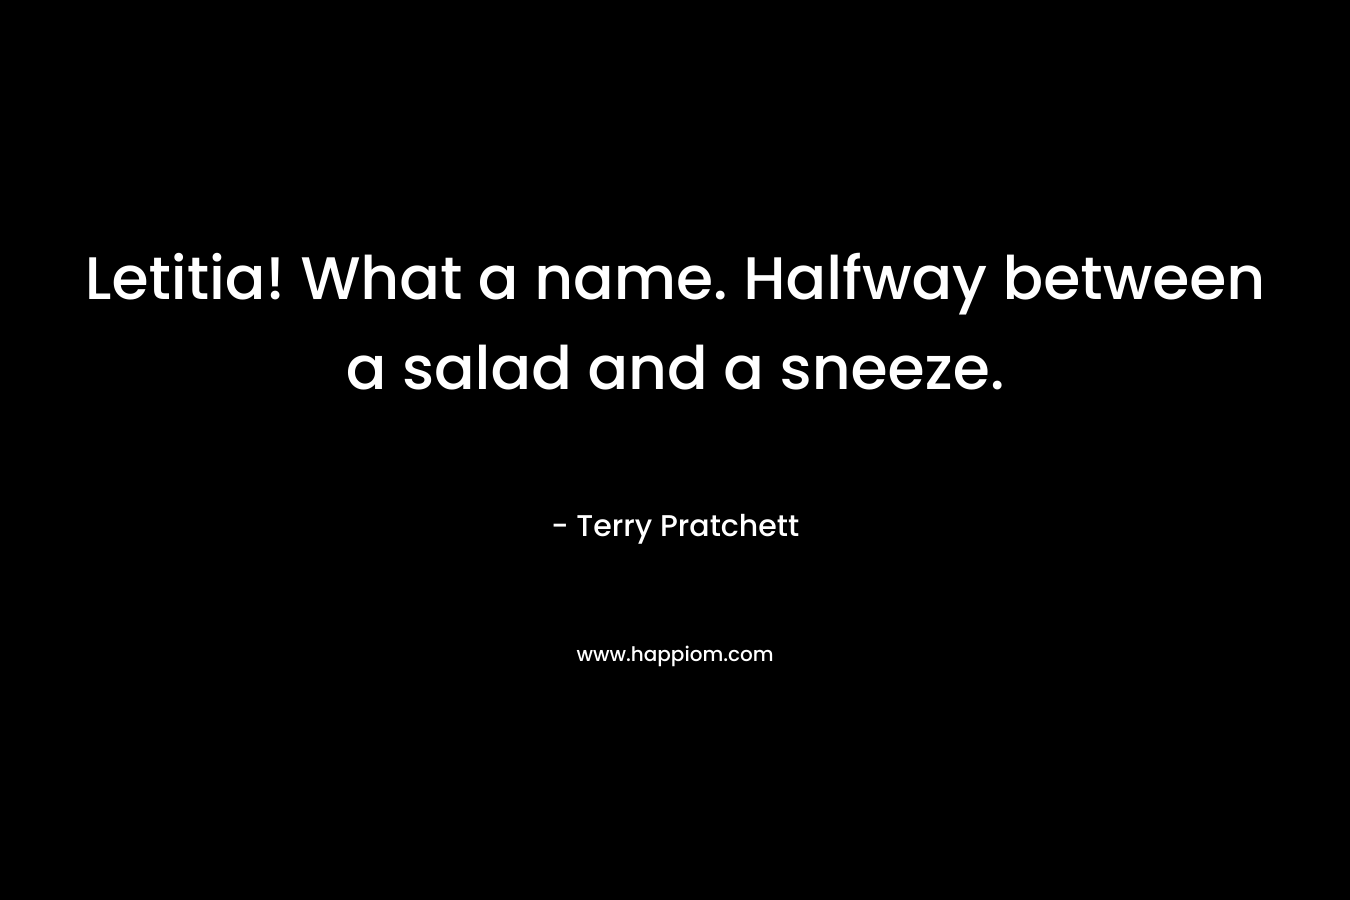 Letitia! What a name. Halfway between a salad and a sneeze. – Terry Pratchett